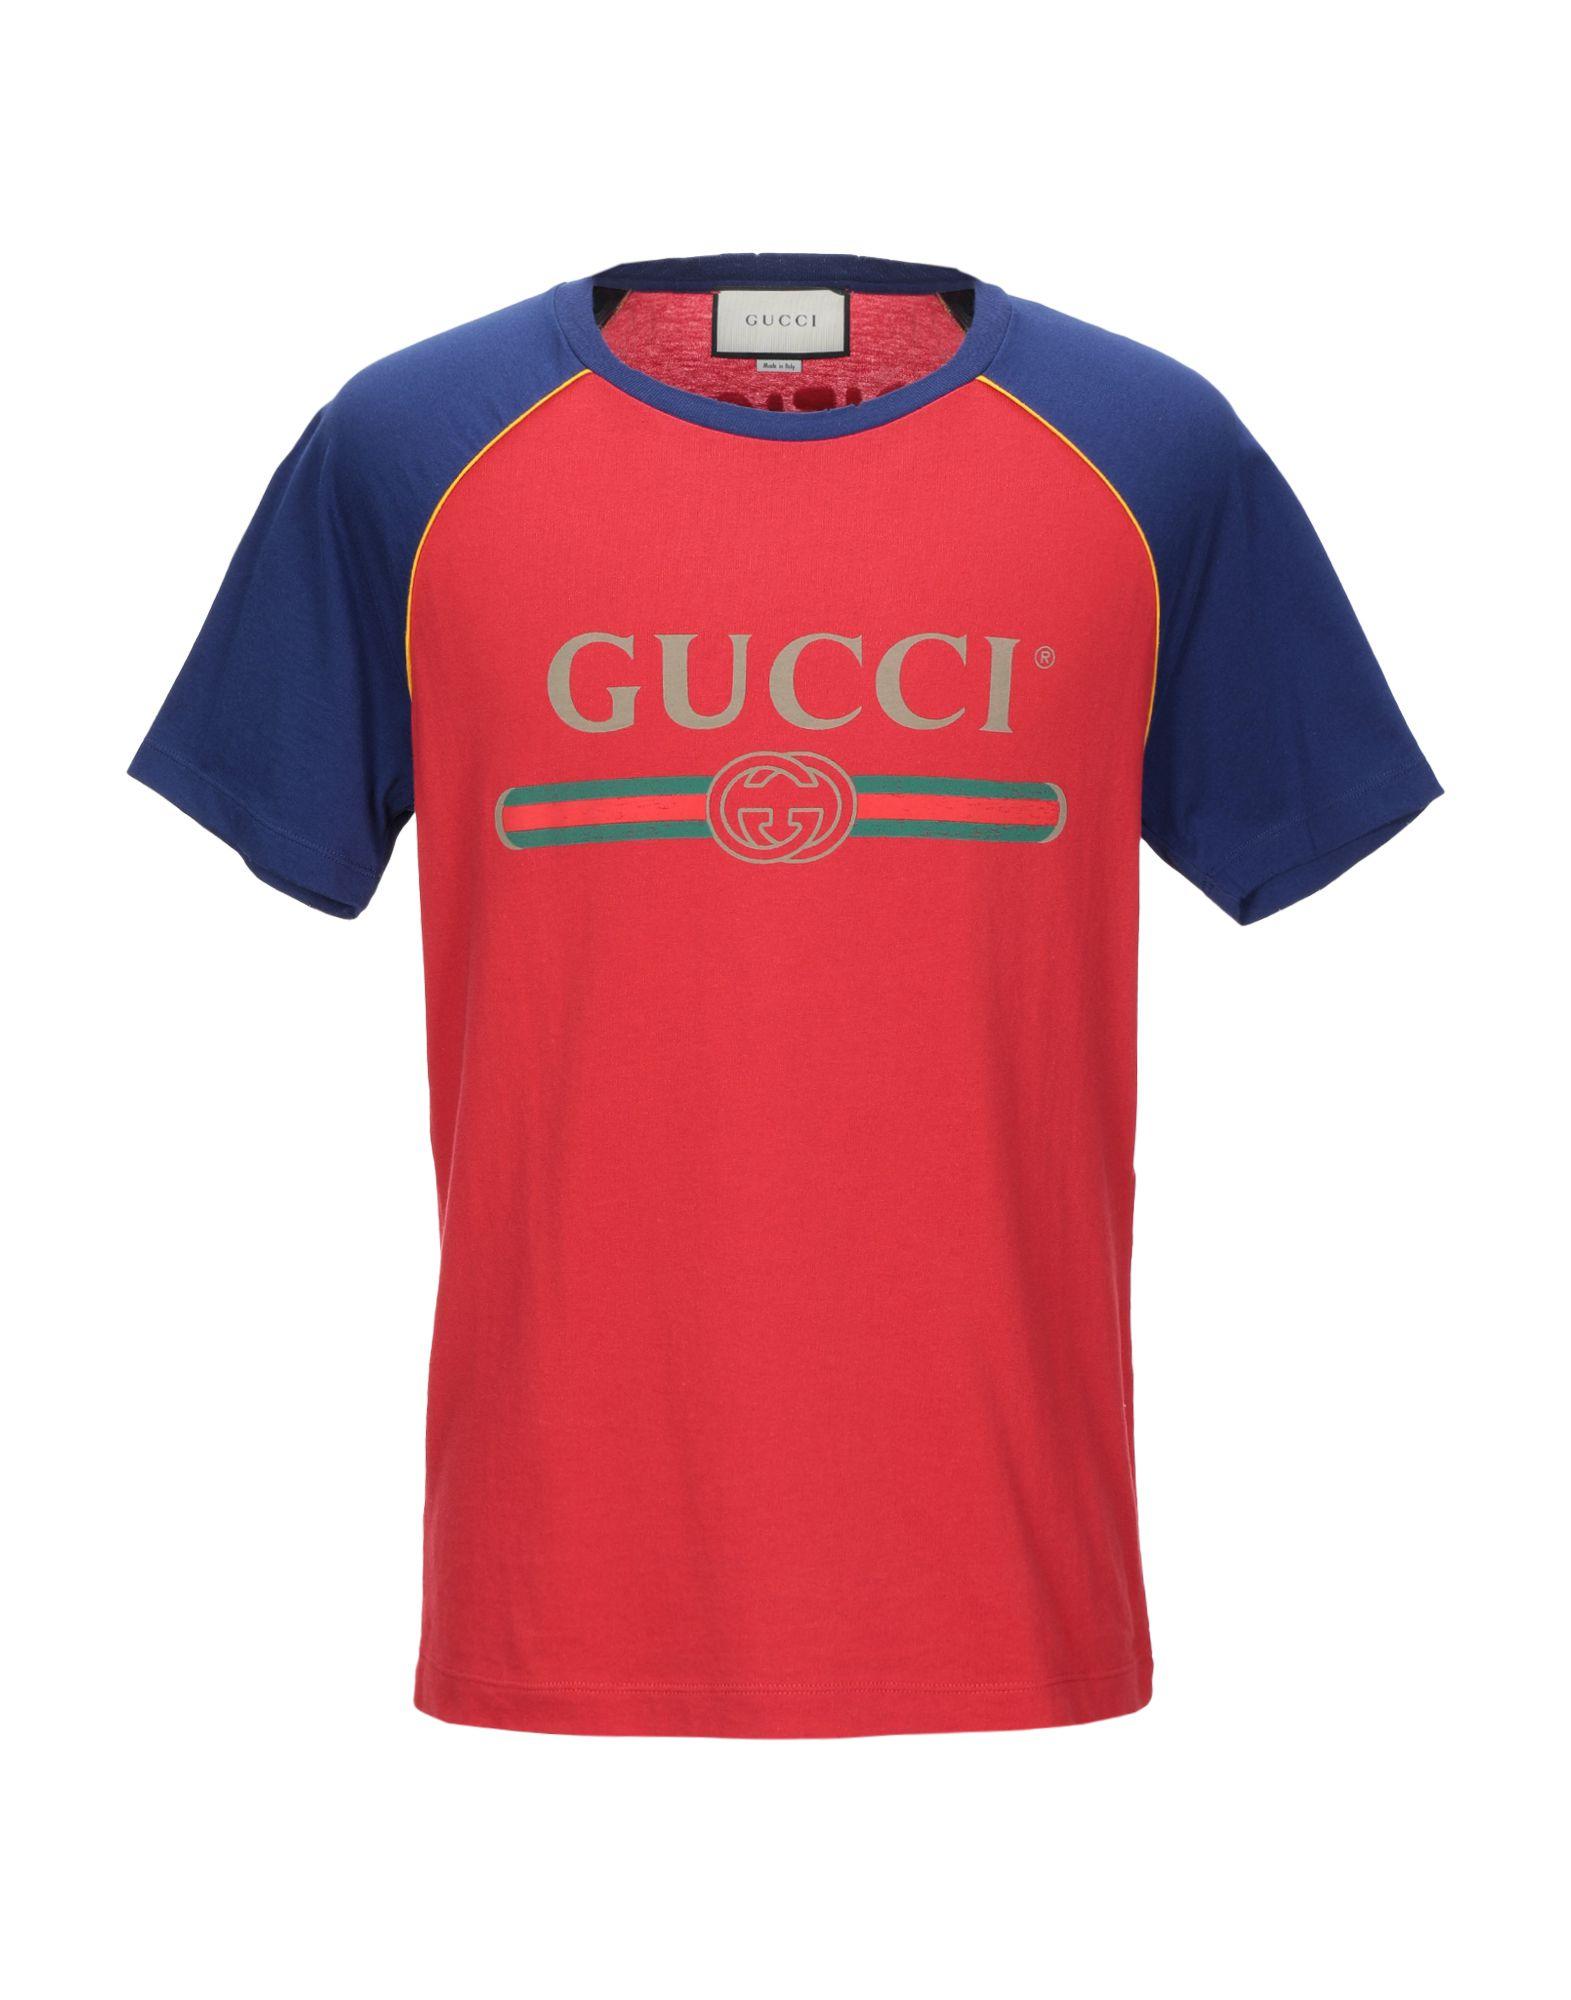 Gucci Cotton T-shirt in Red Pattern (Red) for Men - Lyst